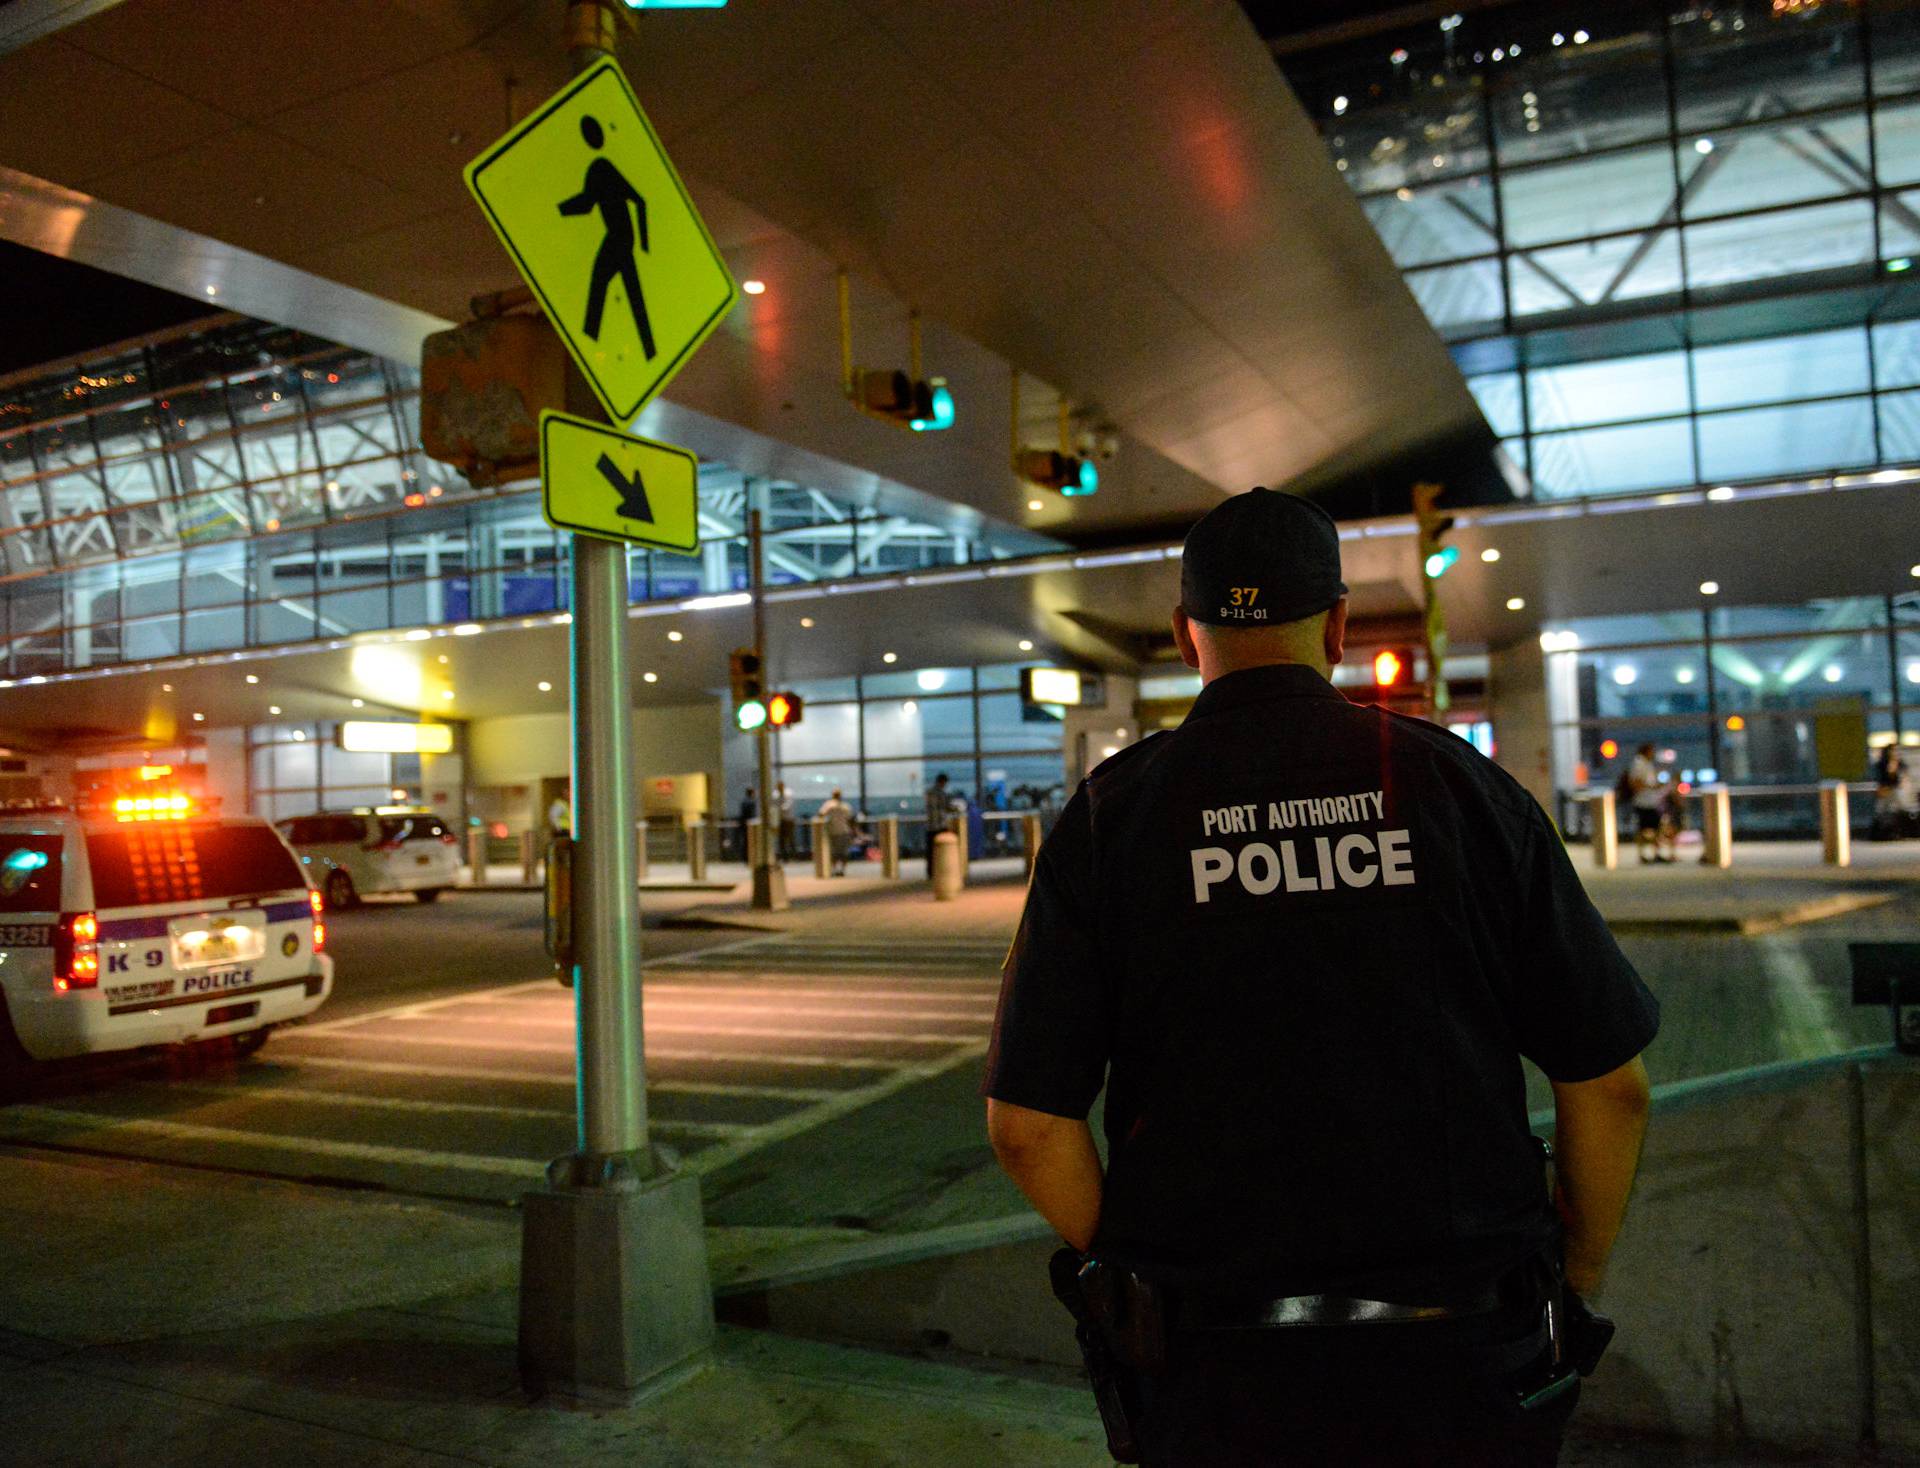 Members of the Port Authority Police Department stand guard at Terminal 8 at John F. Kennedy airport in the Queens borough of New York City